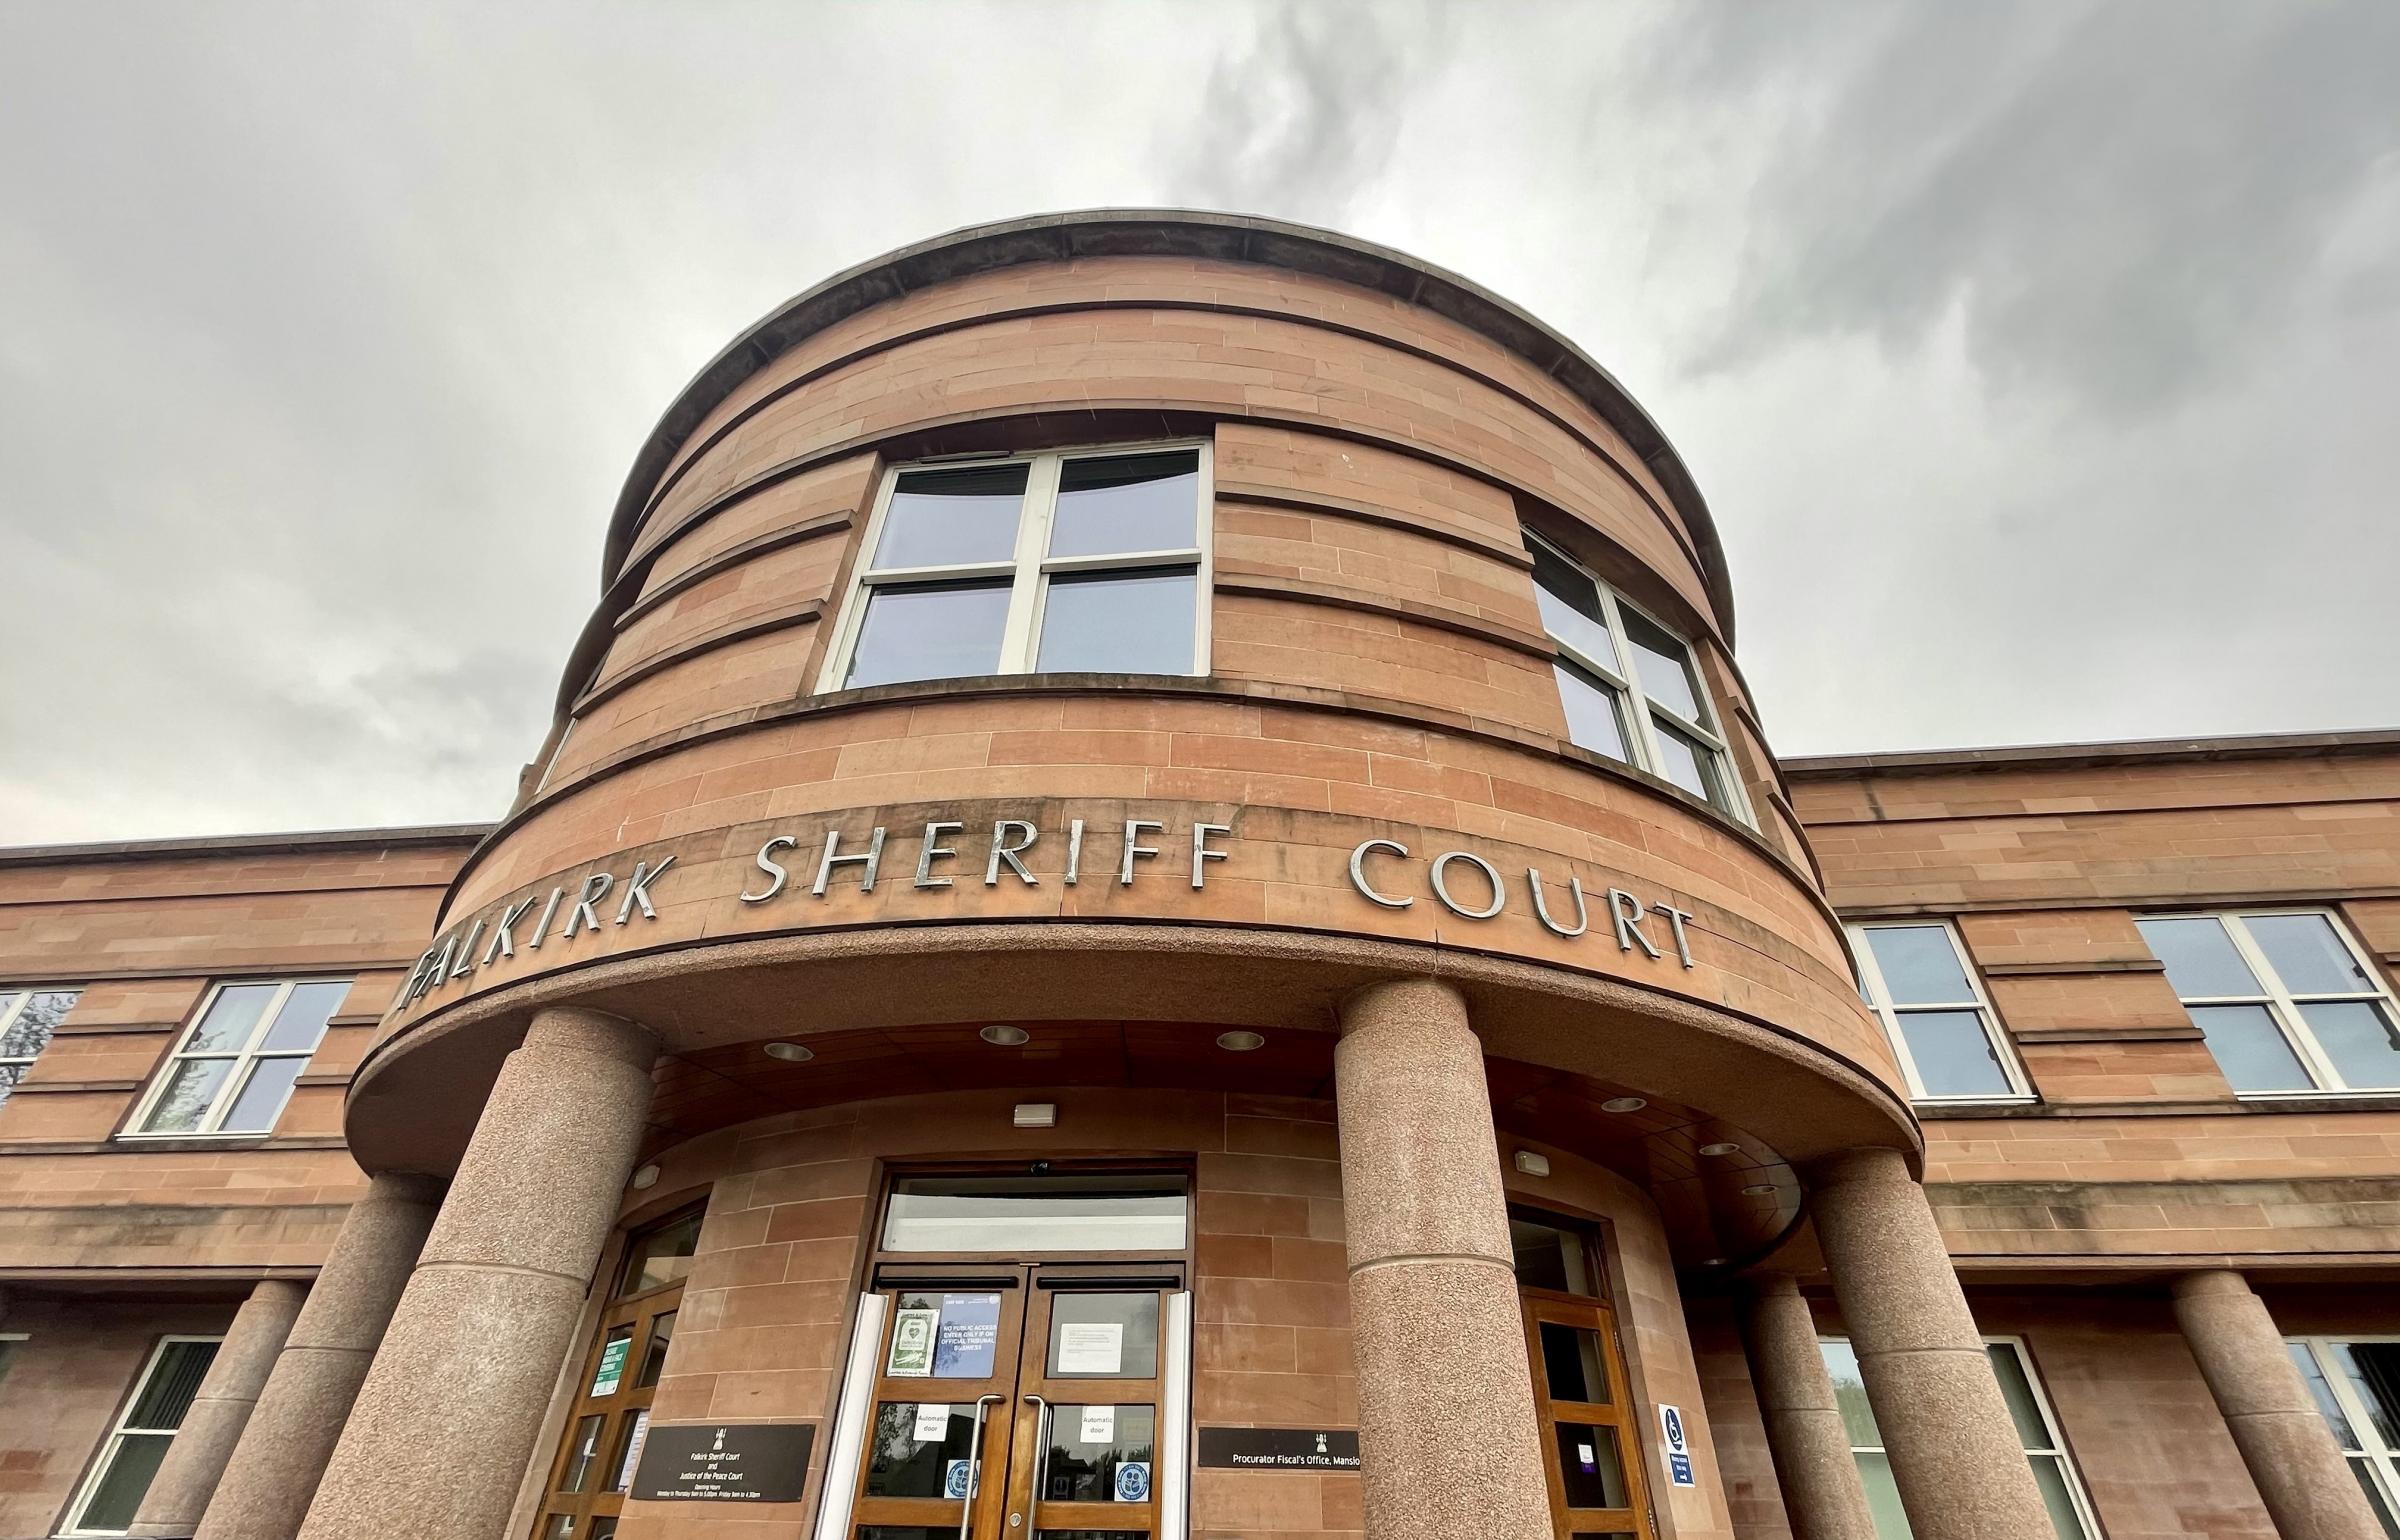 Clacks man jailed for ten-hour attack on woman